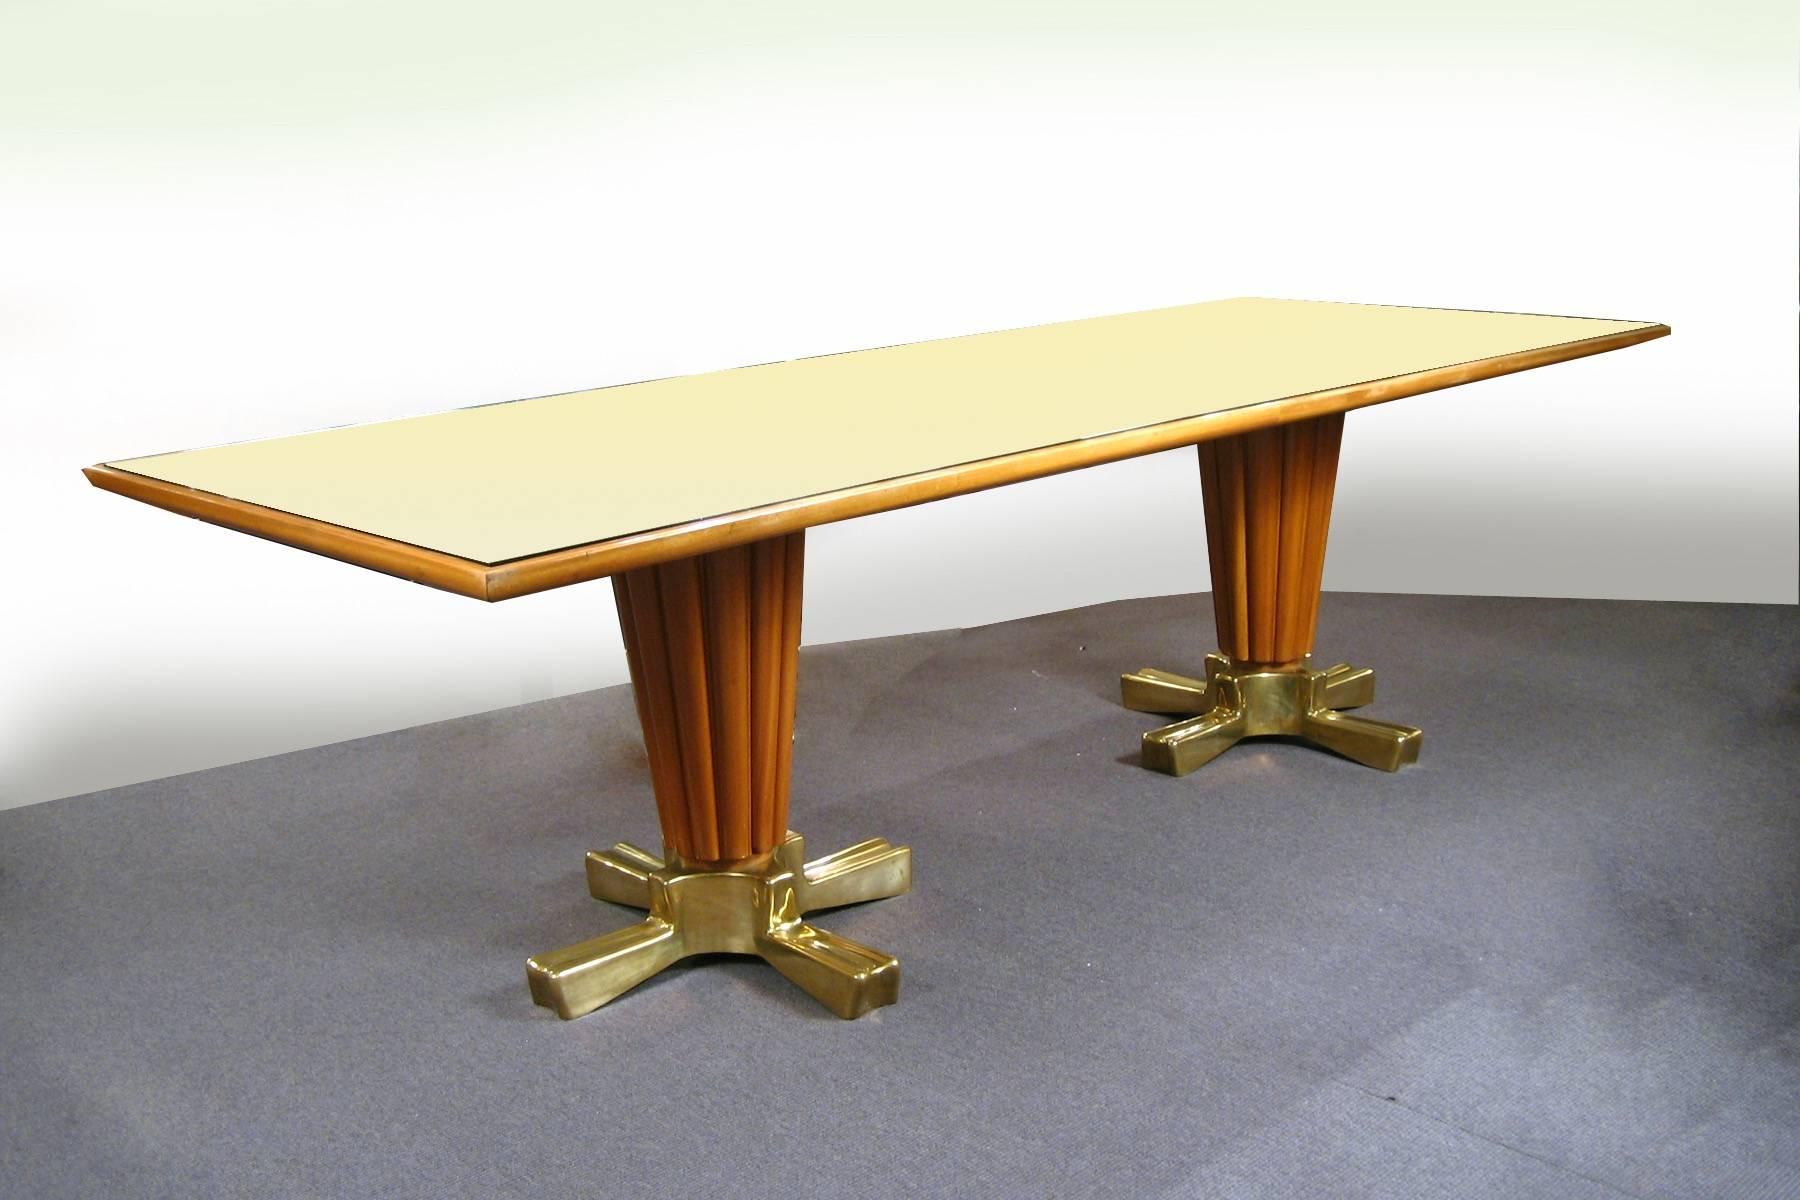 Italian walnut with bronze feet and parchment inset with glass, composed of two tapering, fluted columns, each on four shapely feet, supporting a parchment lined surface, protected with glass.

OUR REFERENCE N4128